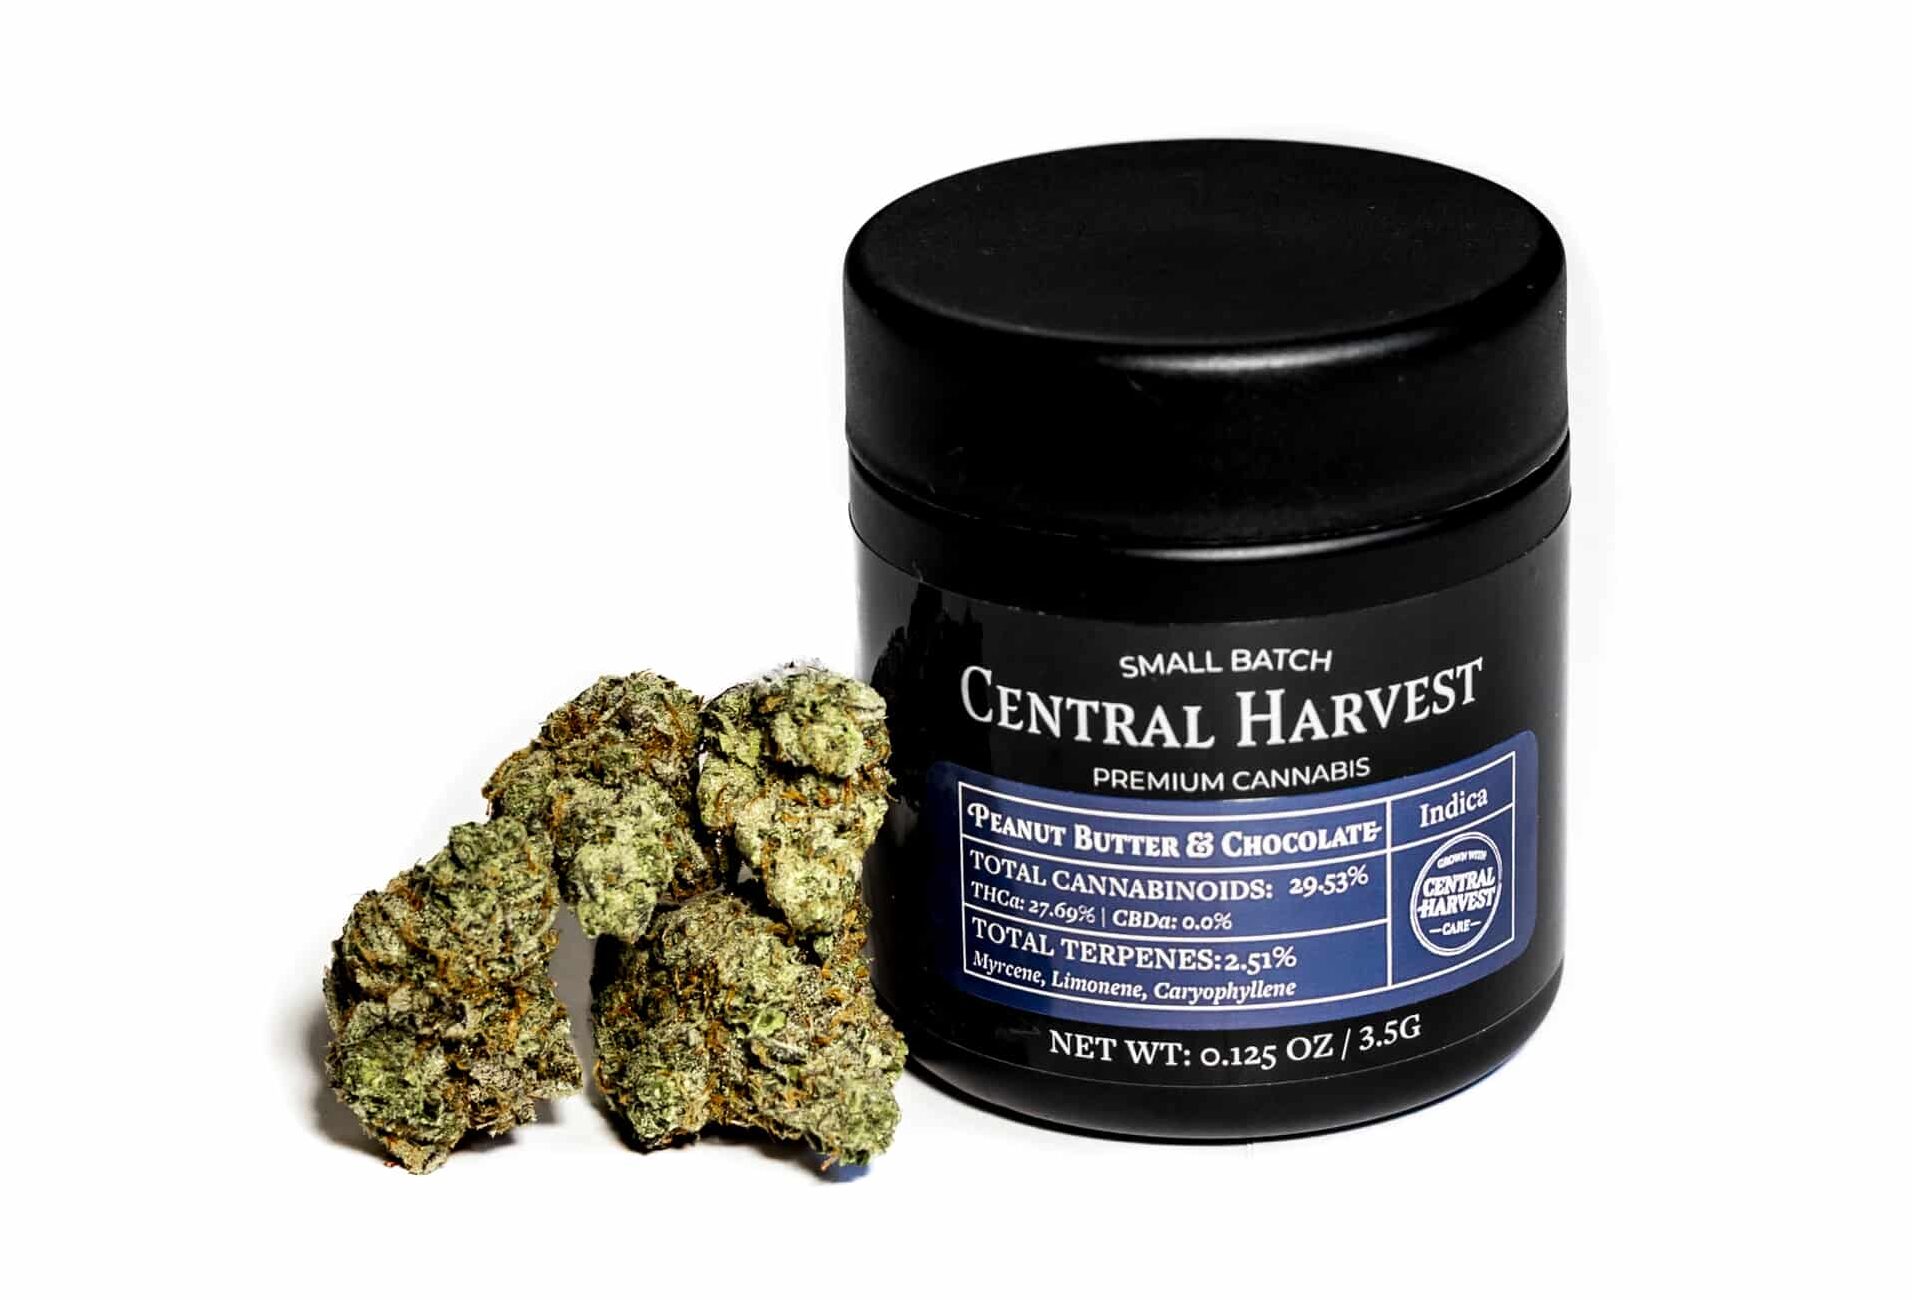 Peanut Butter & Chocolate is an Indica Cannabis strain grown by Central Harvest